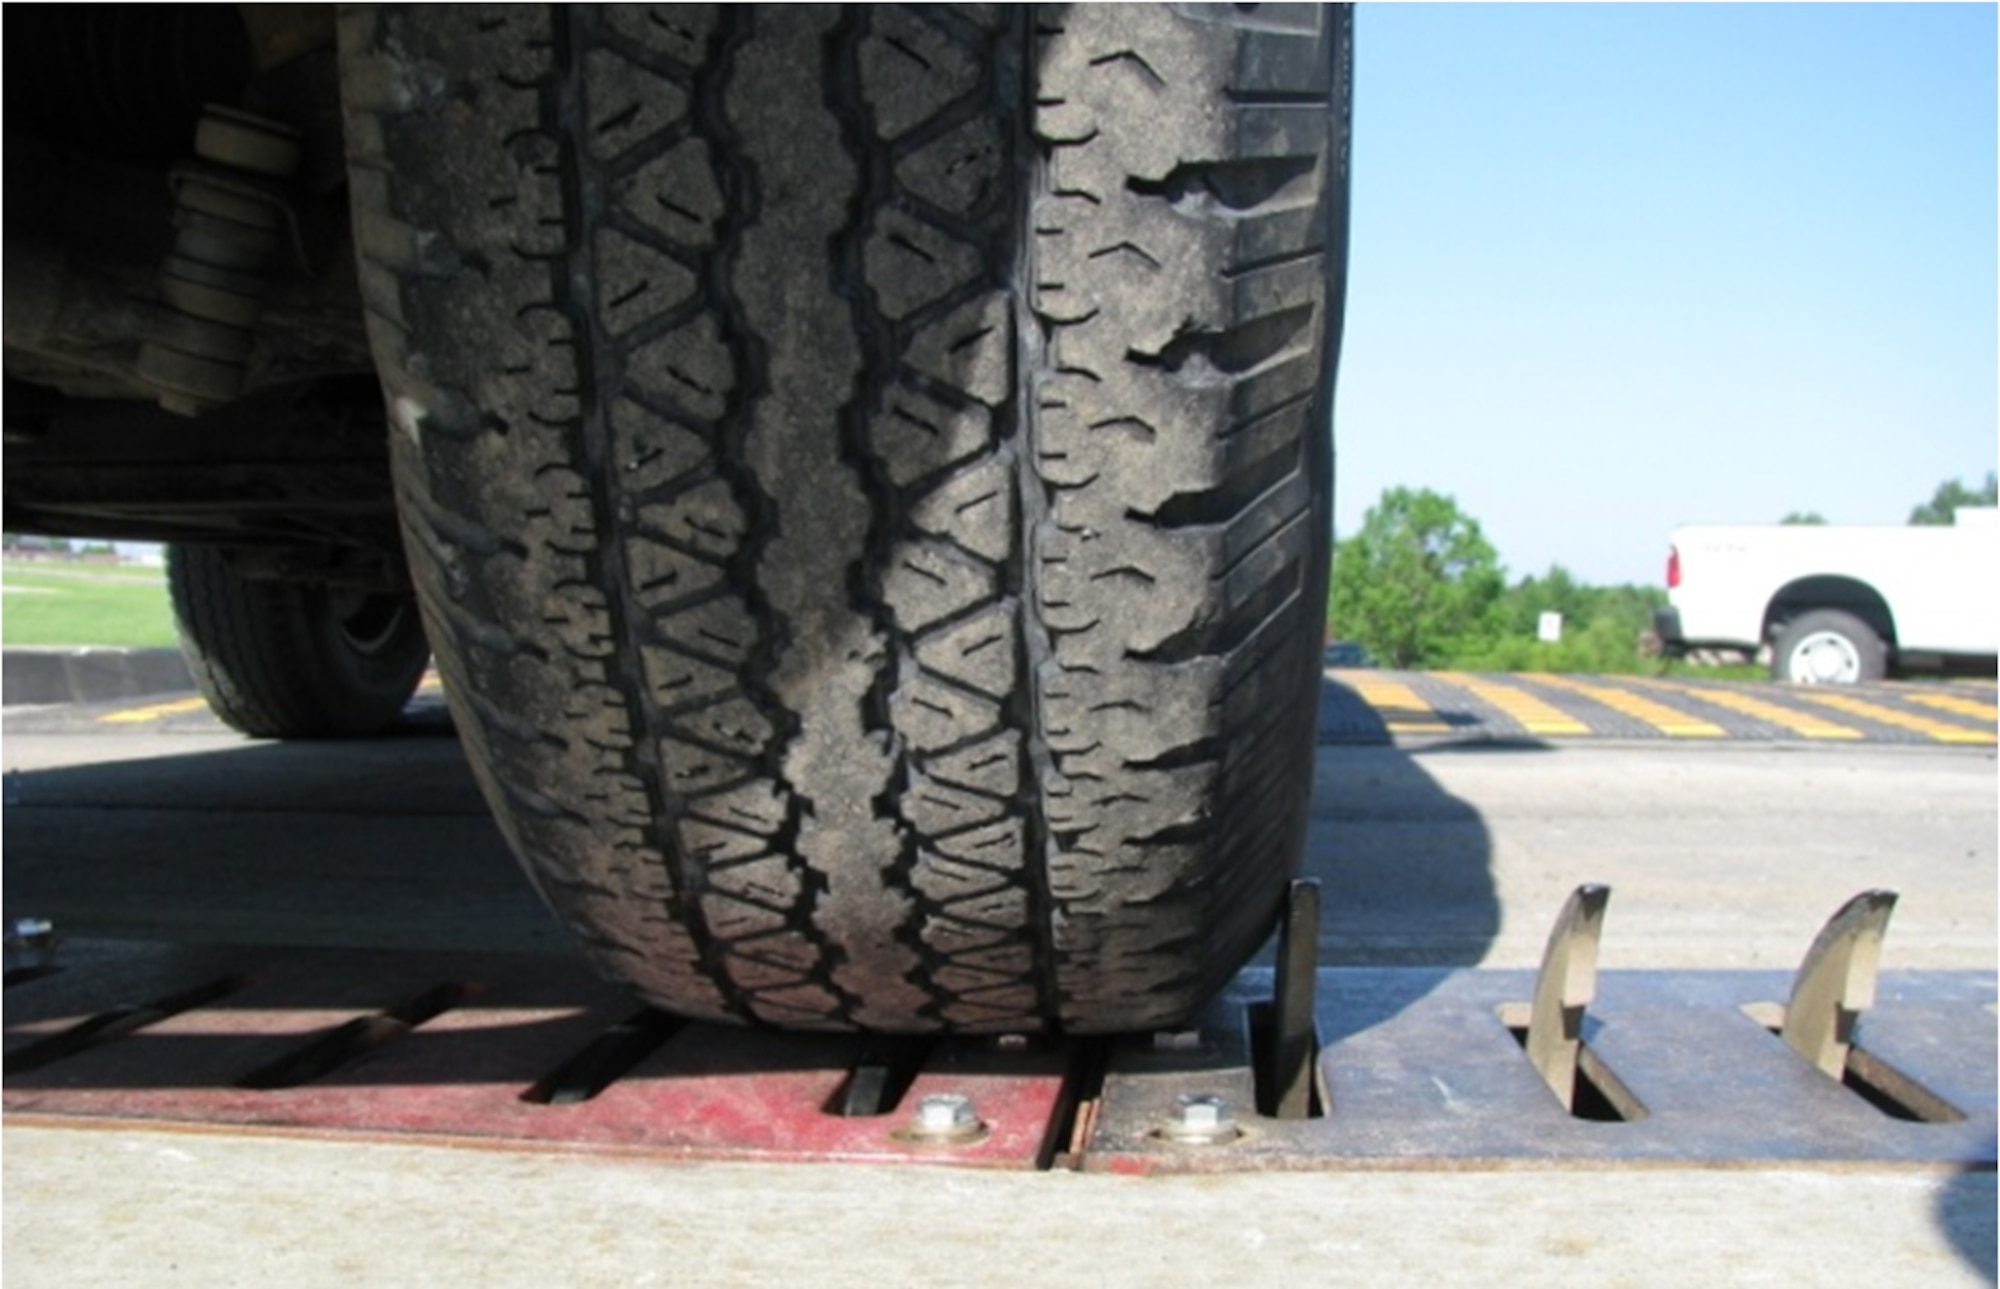 WHITEMAN AIR FORCE BASE, Mo. - Pictured here, steel anti-terrorism/force-protection spikes have recently been installed at each gate on the out-bound lanes to enhance base security. Base personnel are urged to be cautious when driving over the spikes to prevent tire damage. (Courtesy photo)